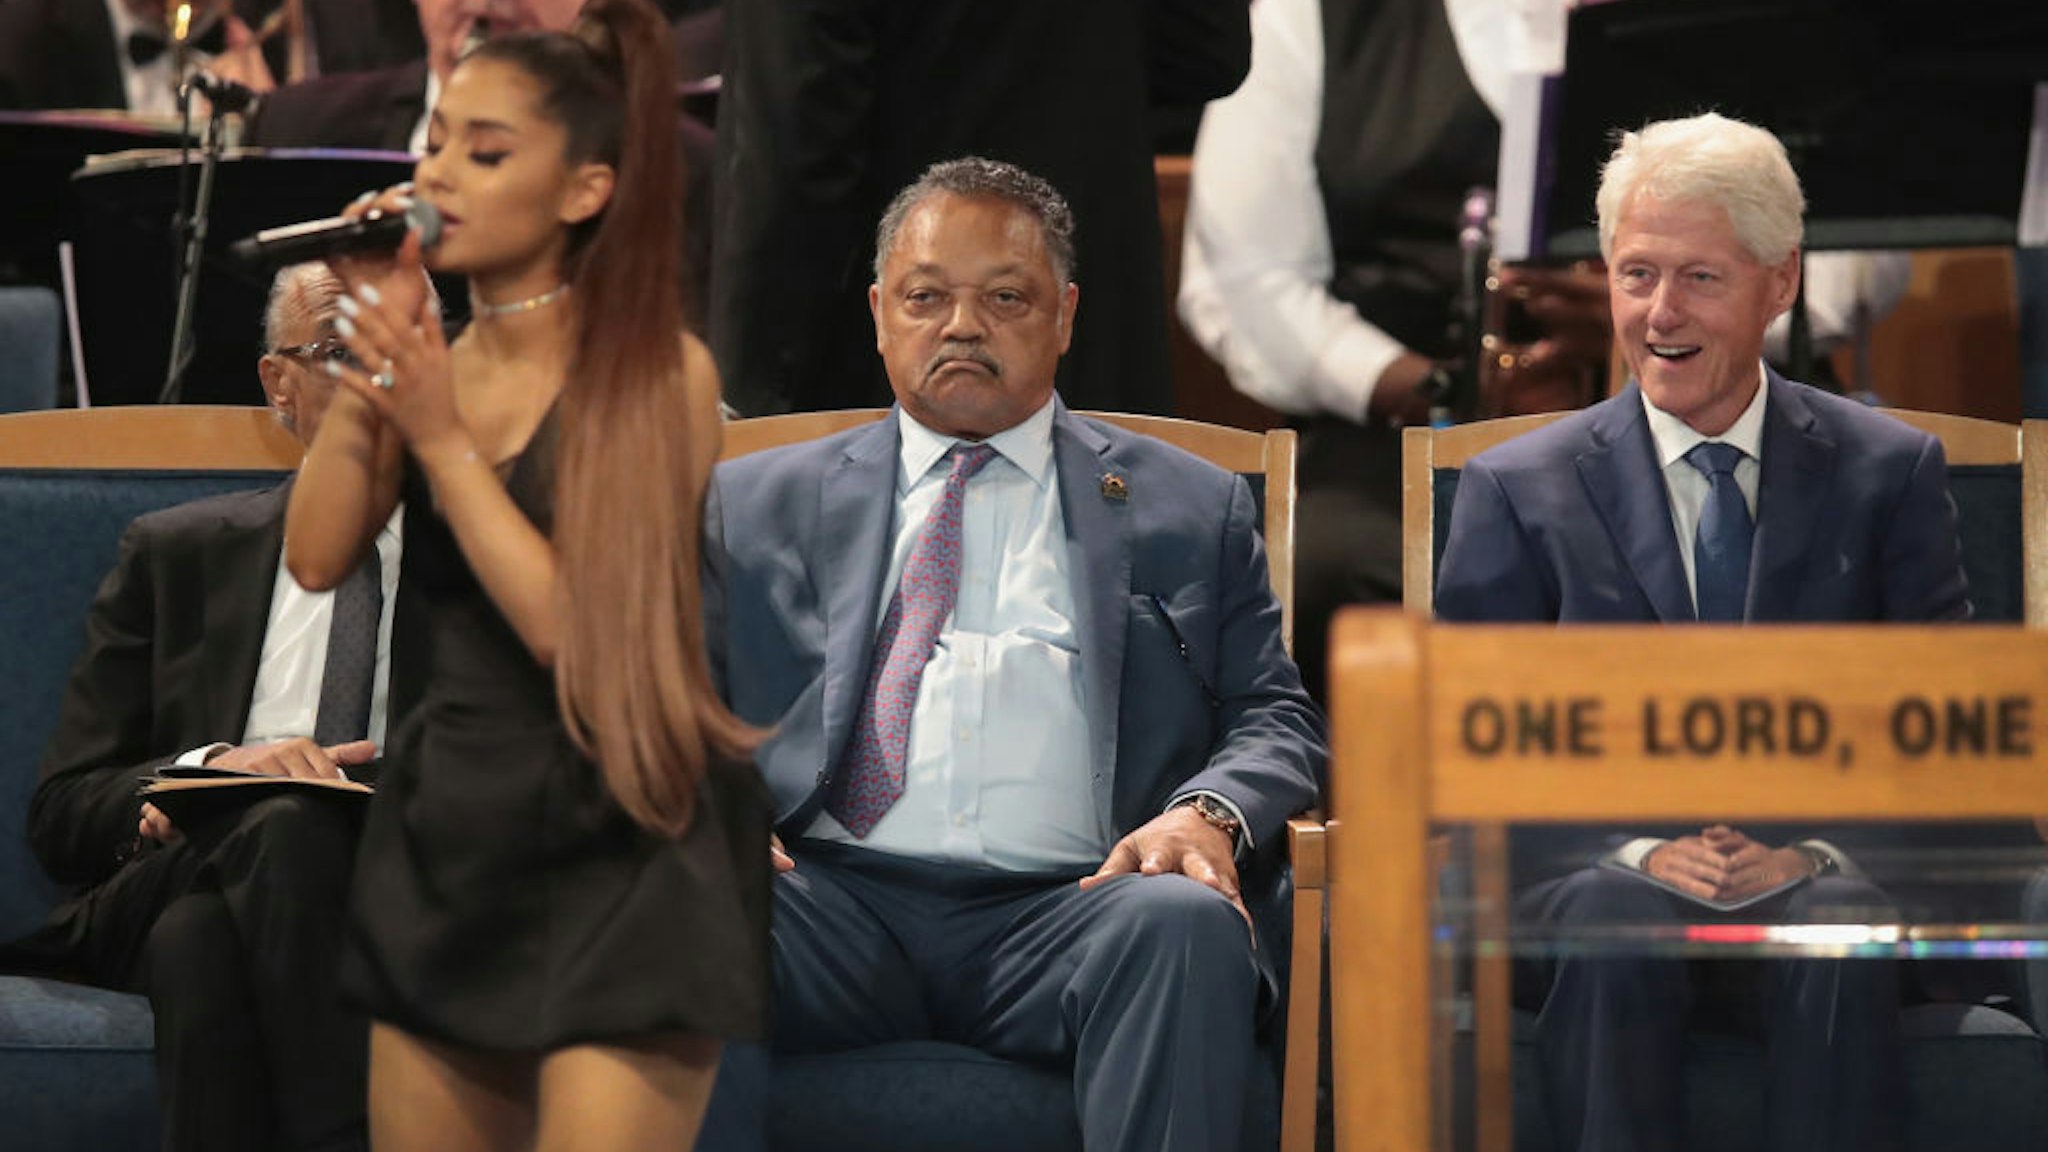 Ariana Grande performs at the funeral for Aretha Franklin at the Greater Grace Temple on August 31, 2018 in Detroit, Michigan. Franklin,